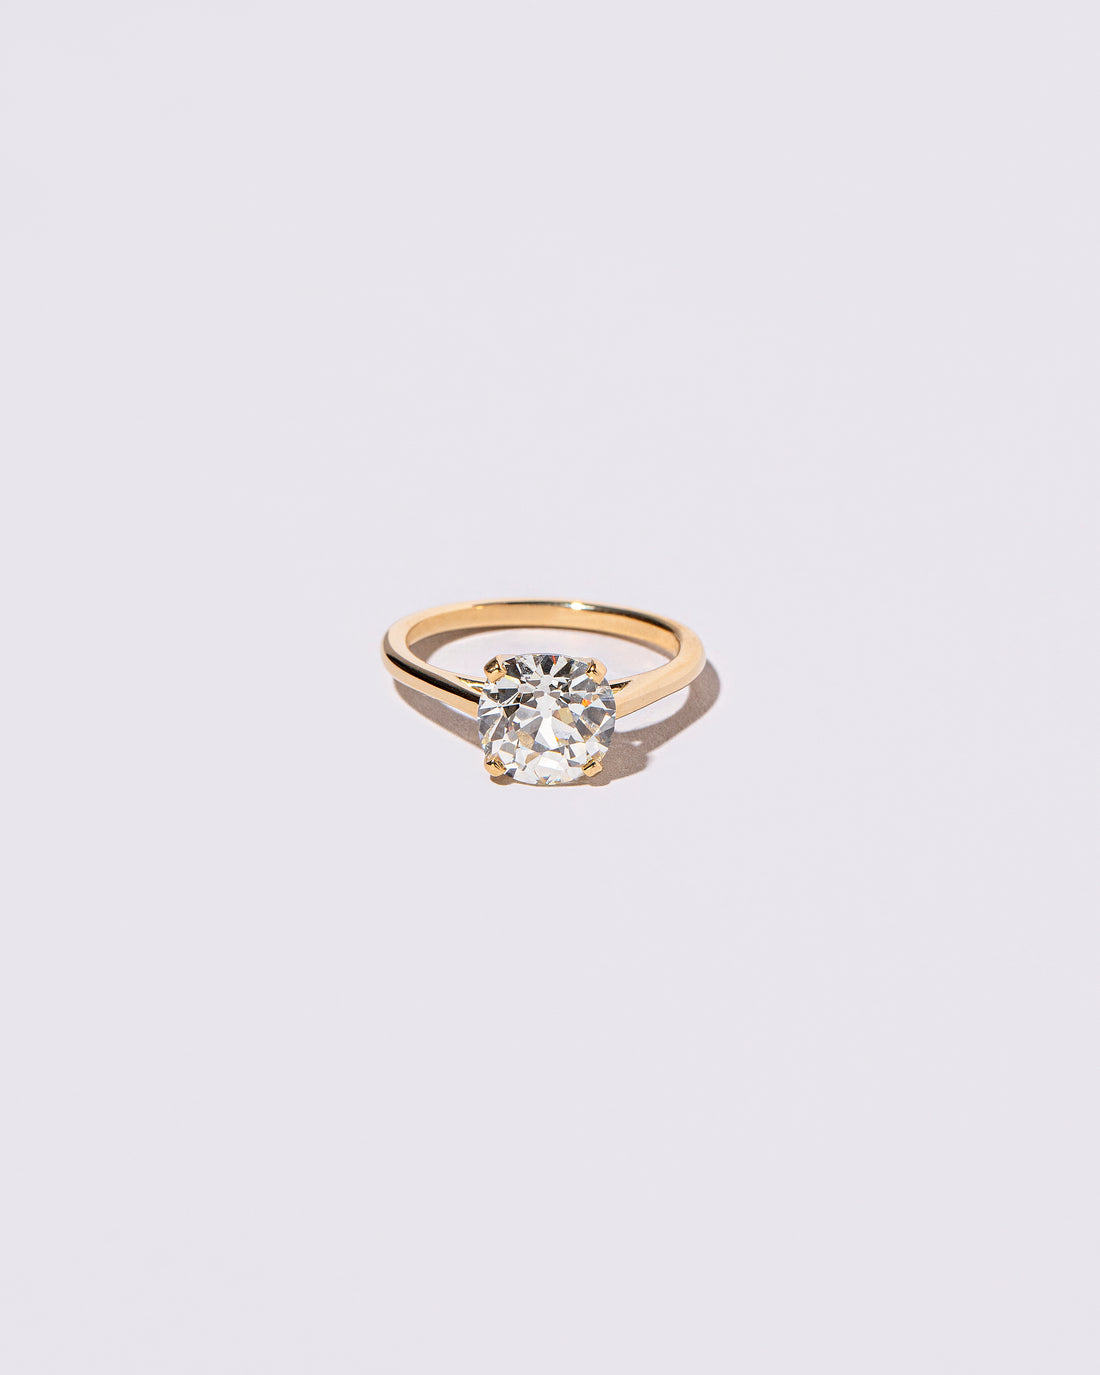 Old Mine Cut Diamond Solitaire front facing